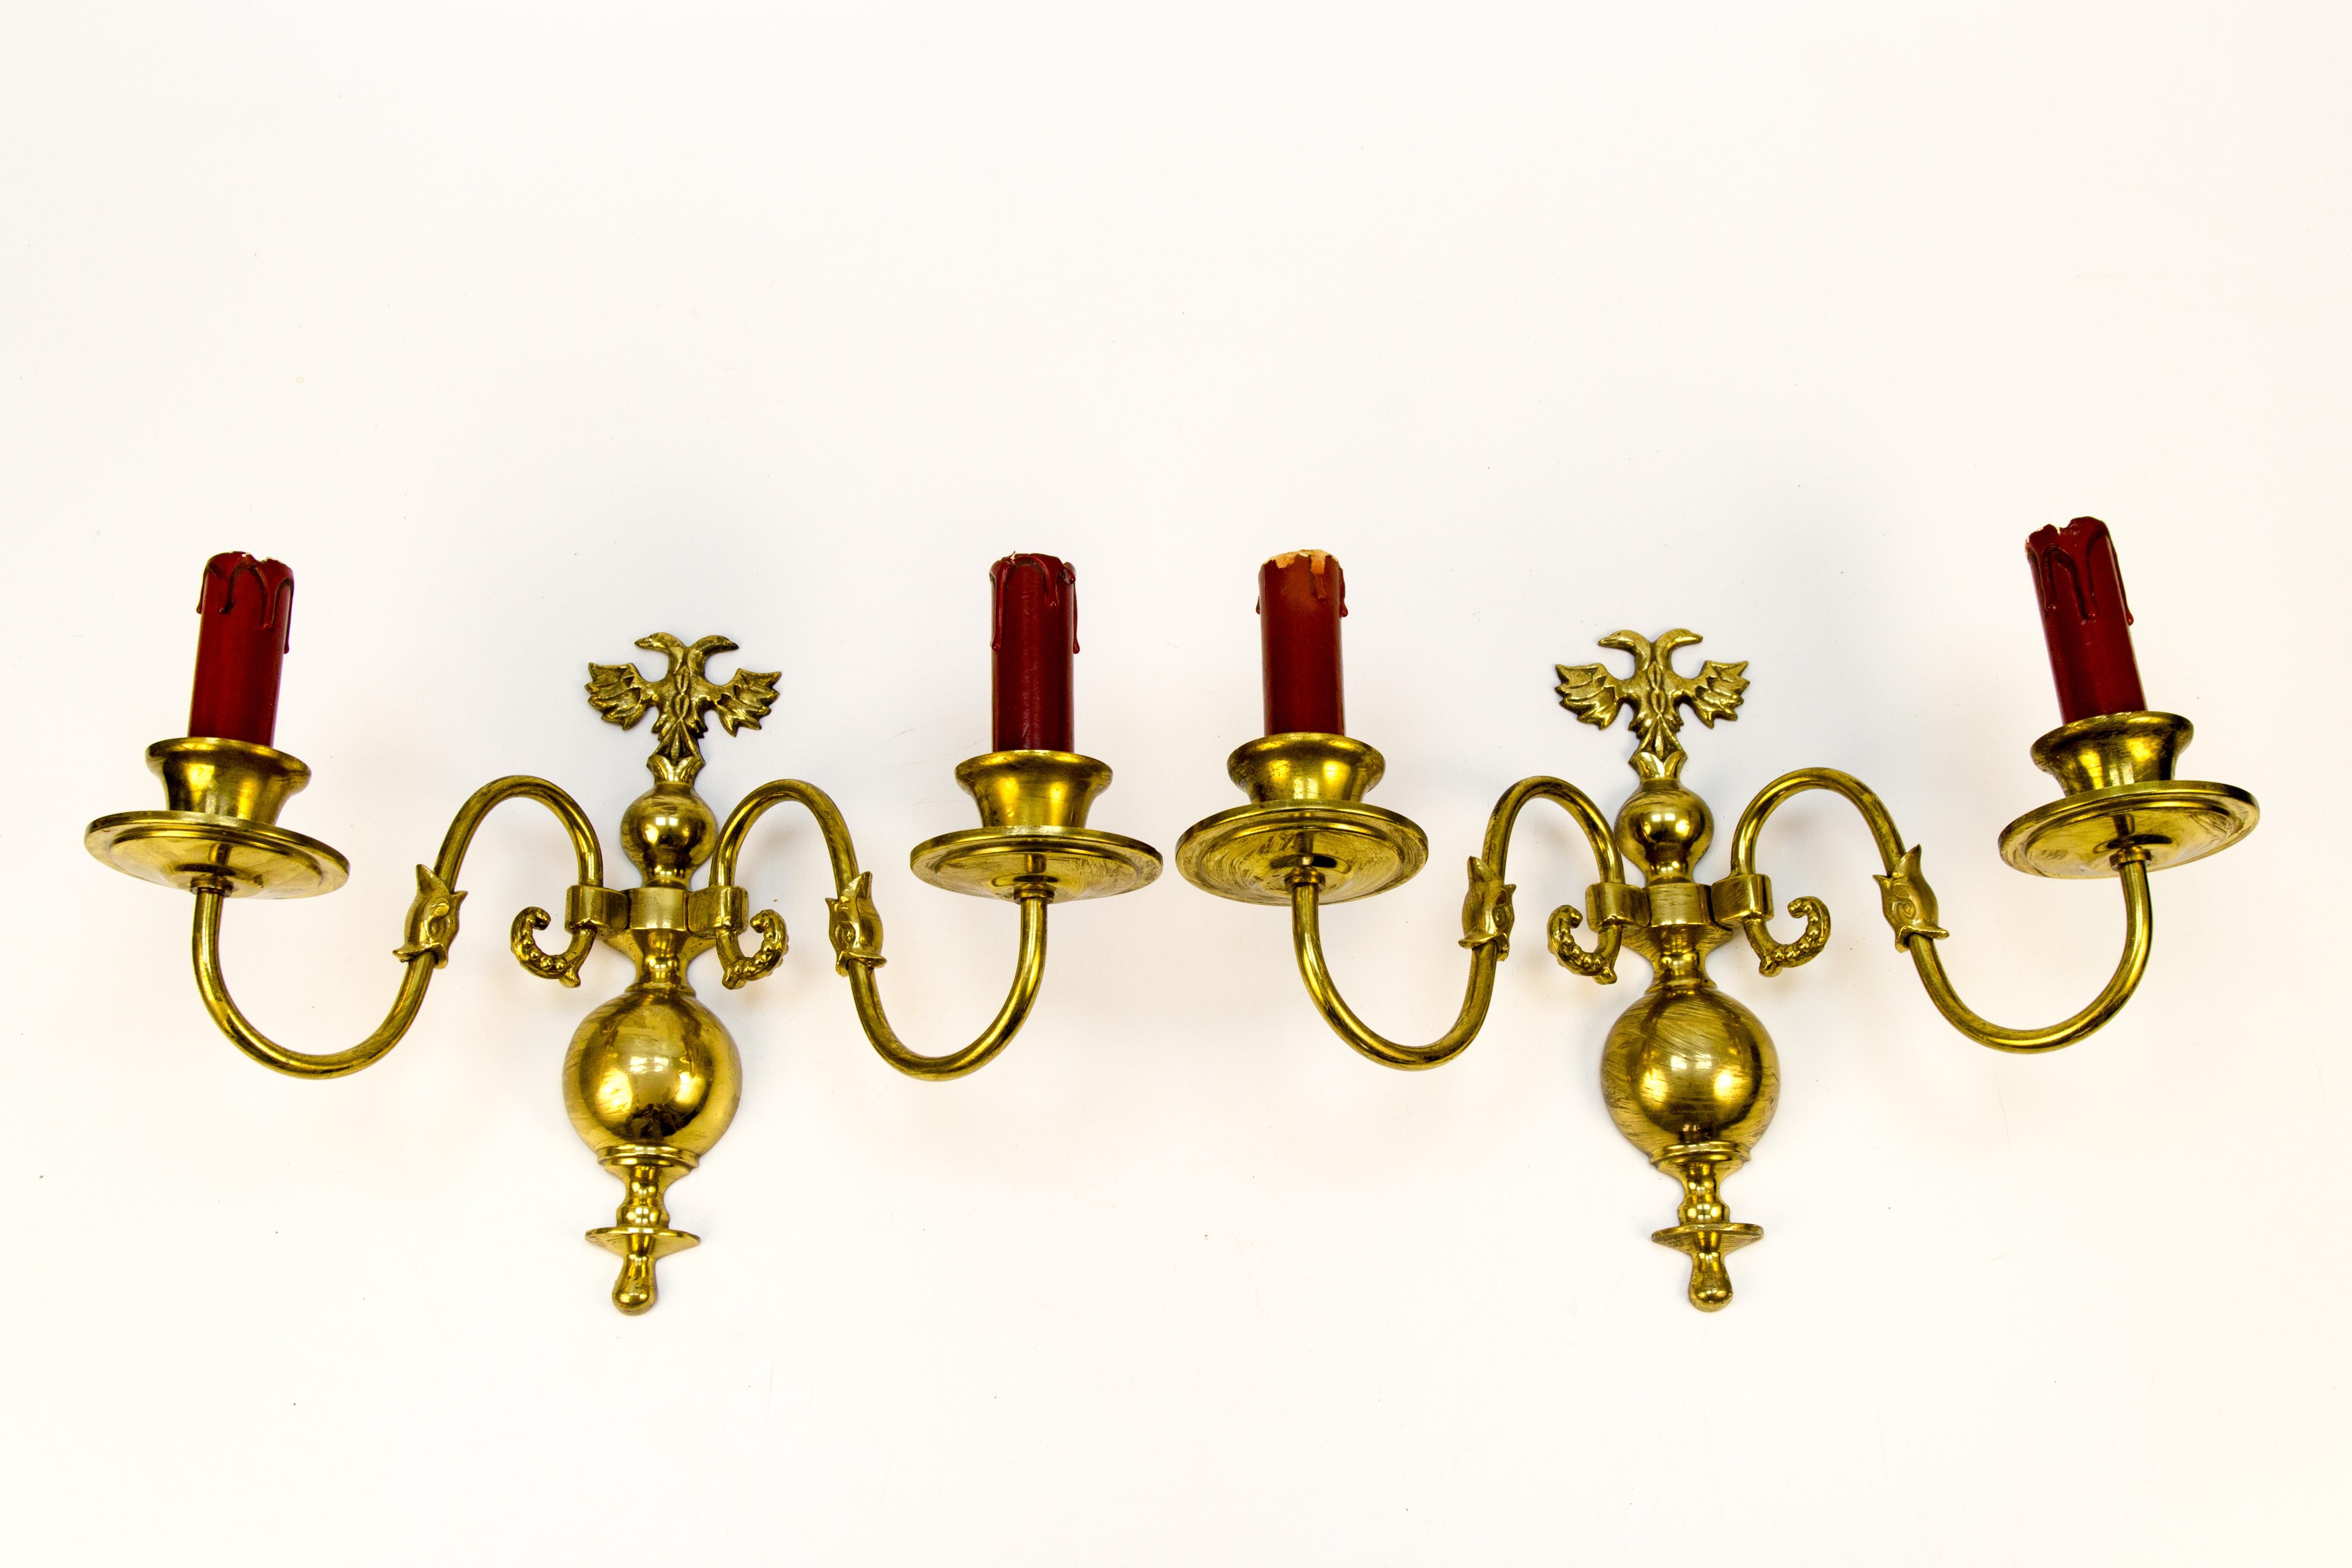 A pair of Dutch brass wall sconces from the 1930s. They each have twin nicely stylized arms depicting fish and serpent with classic candle-style bulb holders.
On the top of the central finial, there is a double-headed eagle and a large baluster or